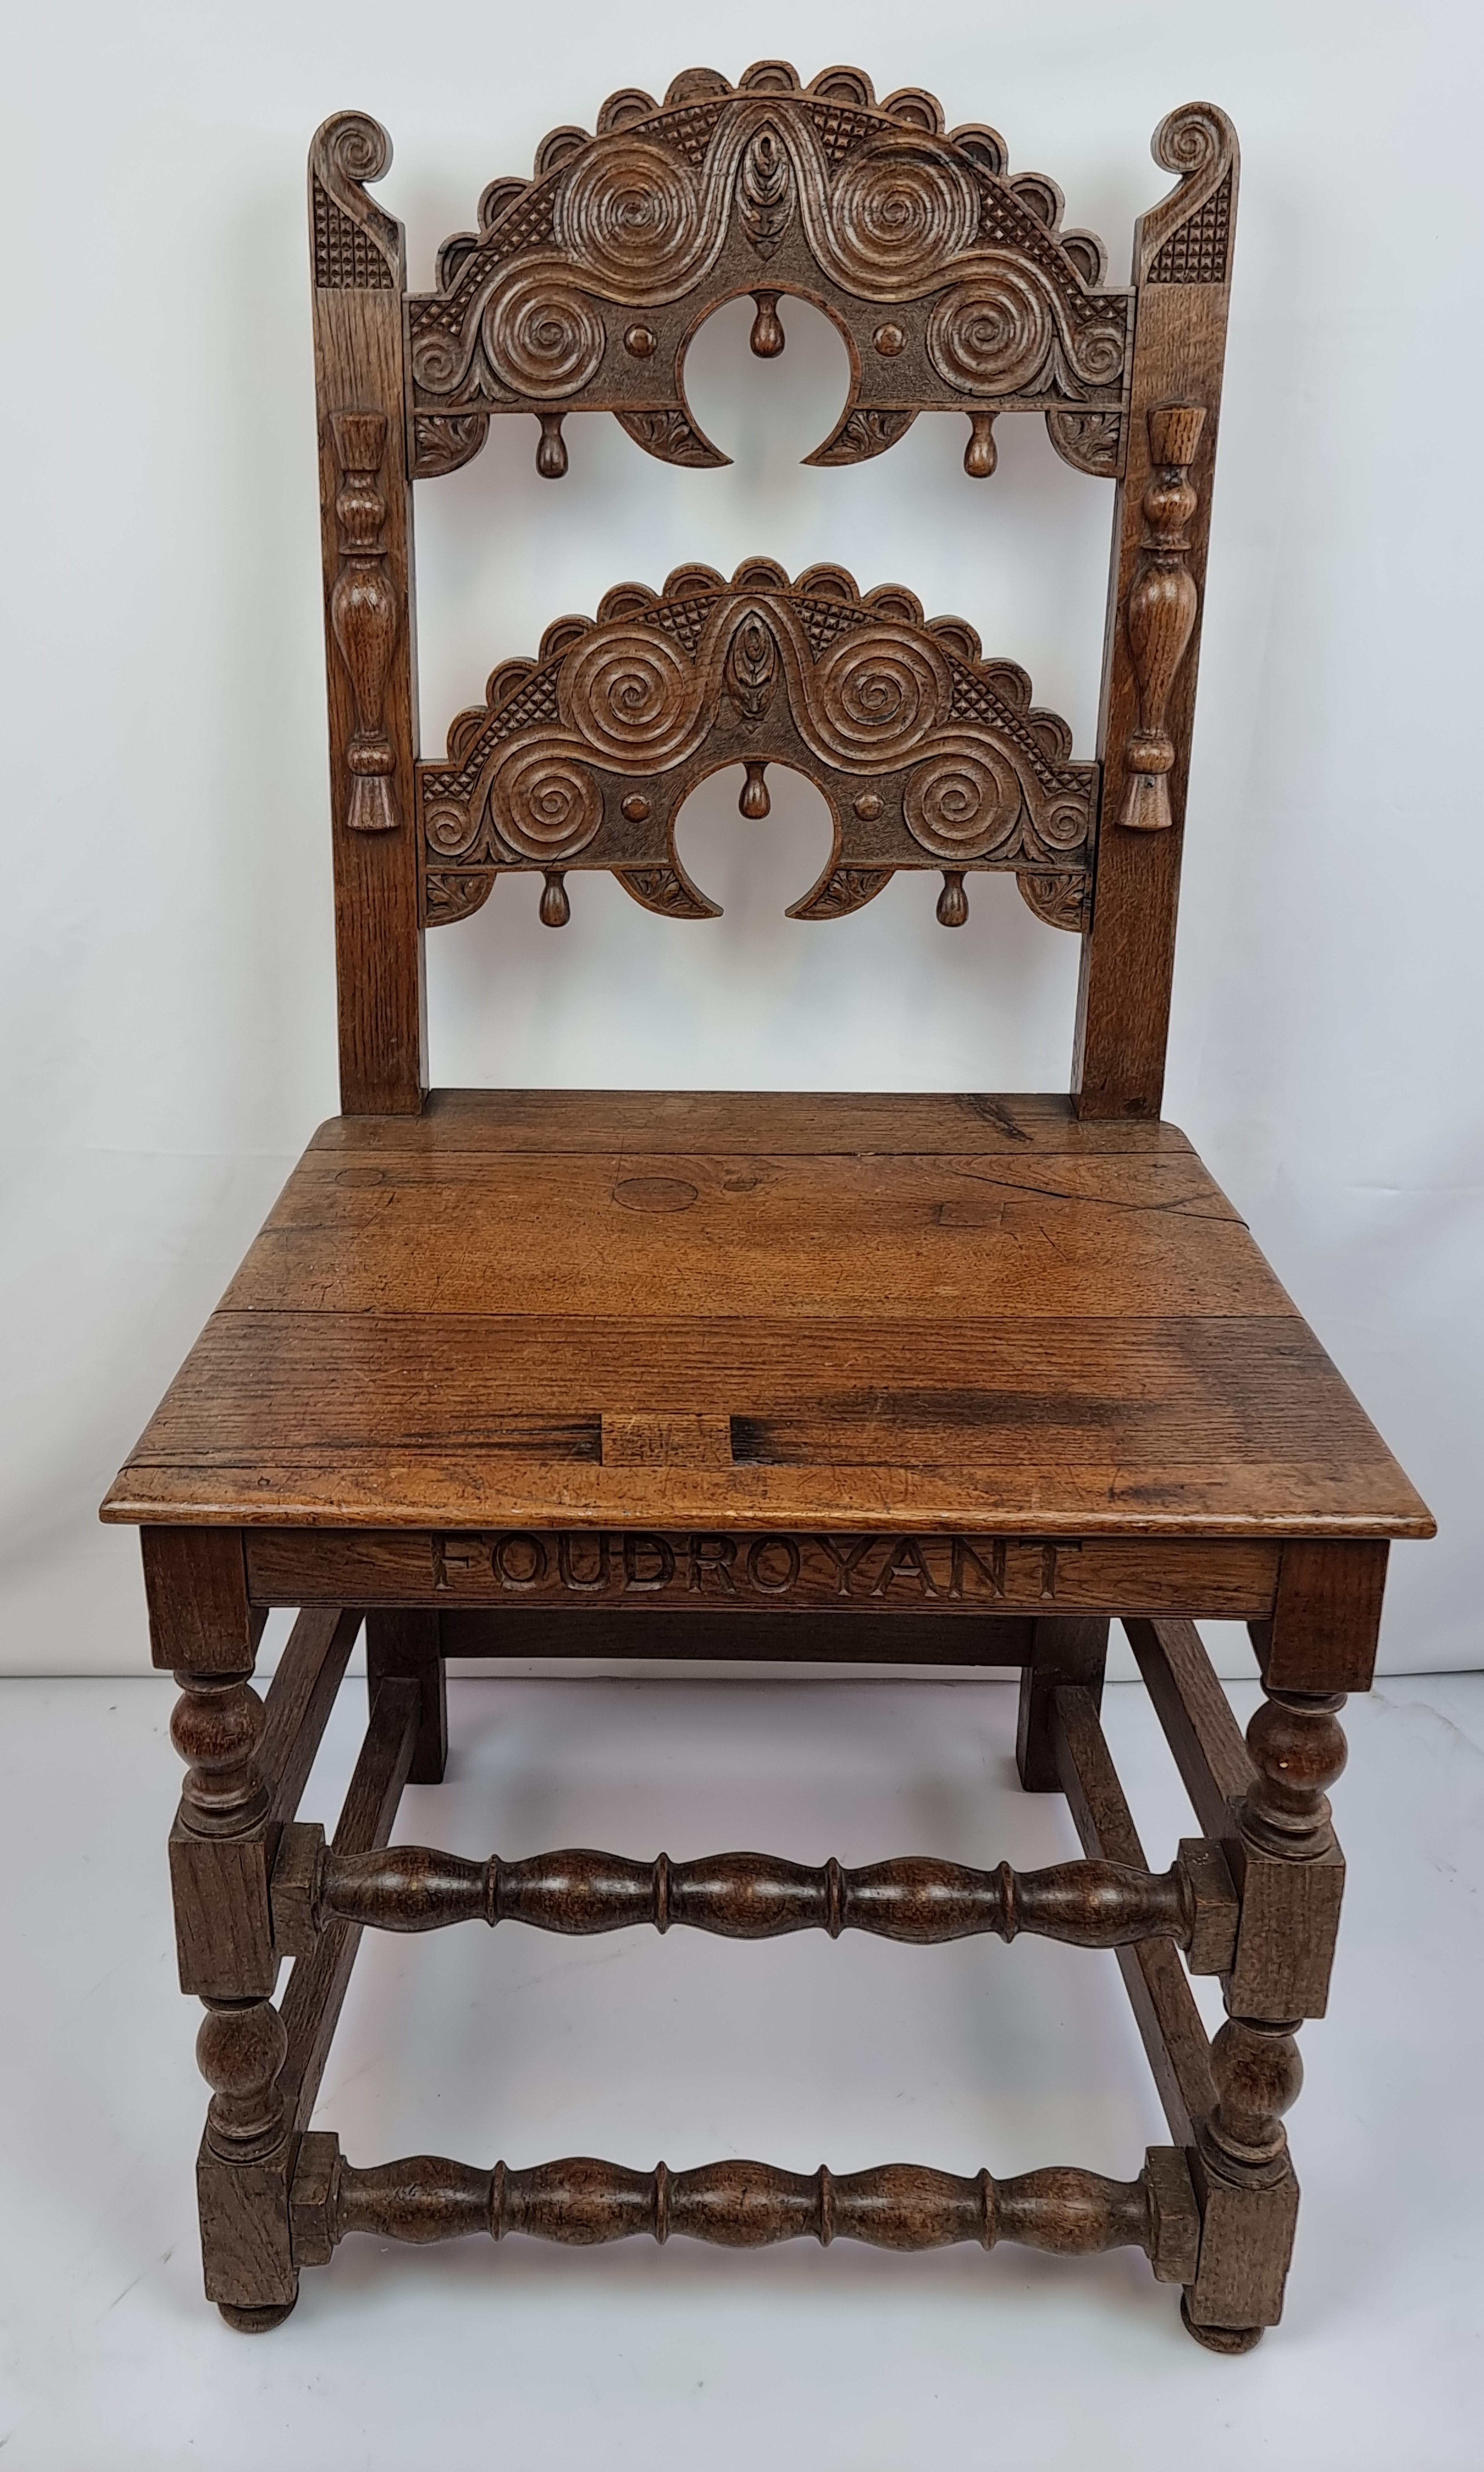 A ‘yorkshire’ Pattern chair by Goodall, Lamb & Heighway Ltd, Manchester, Made From Foudroyant Oak, Circa 1900 - A ‘yorkshire’ Pattern Chair By Goodall, Lamb & Heighway Ltd, Manchester, Made From Foudroyant Oak, Circa 1900 with plain tapering seat,